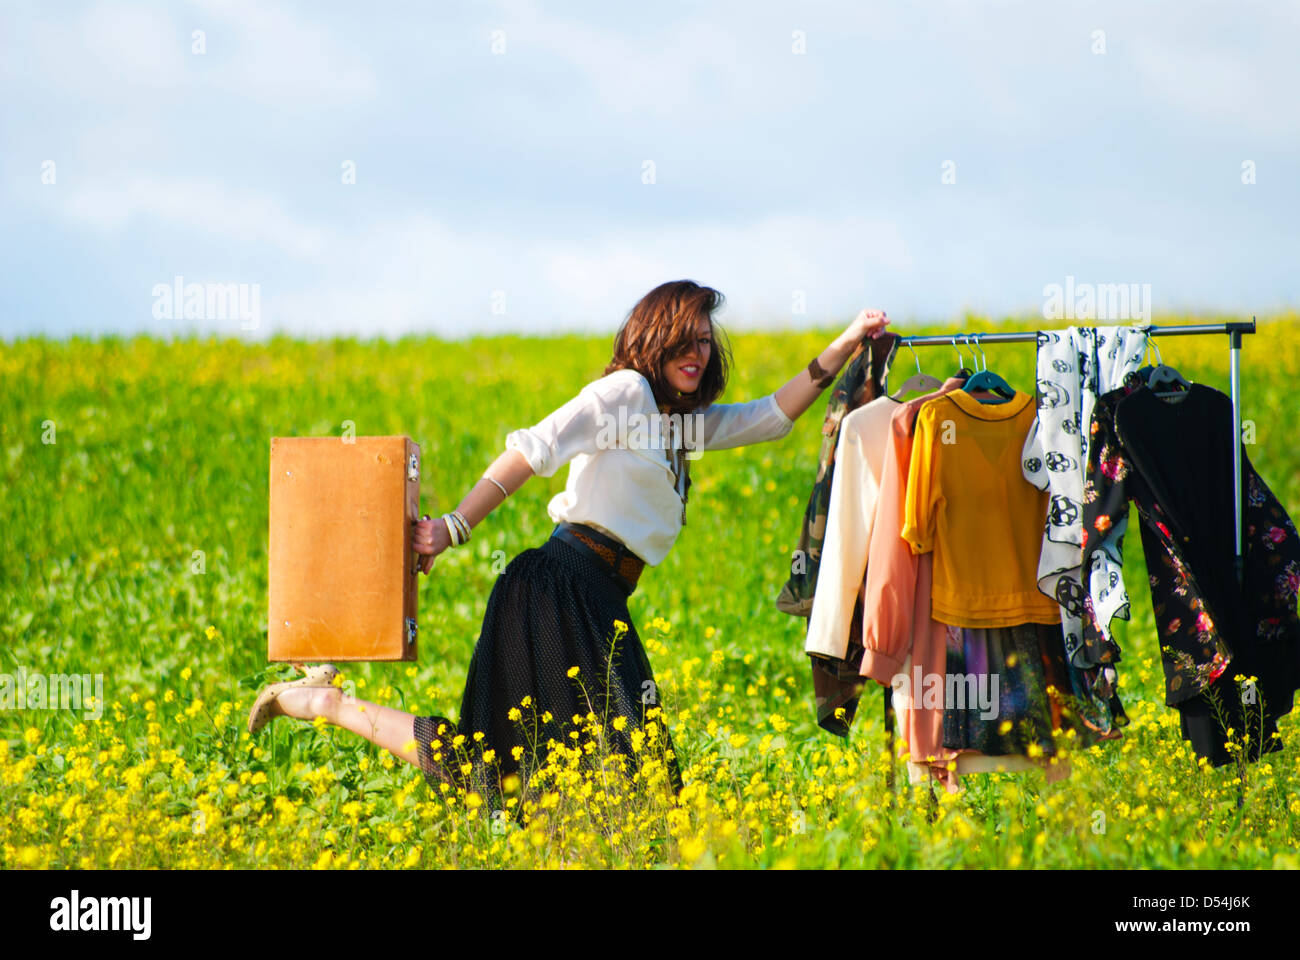 Stylist carrying clothes and suitcase Stock Photo